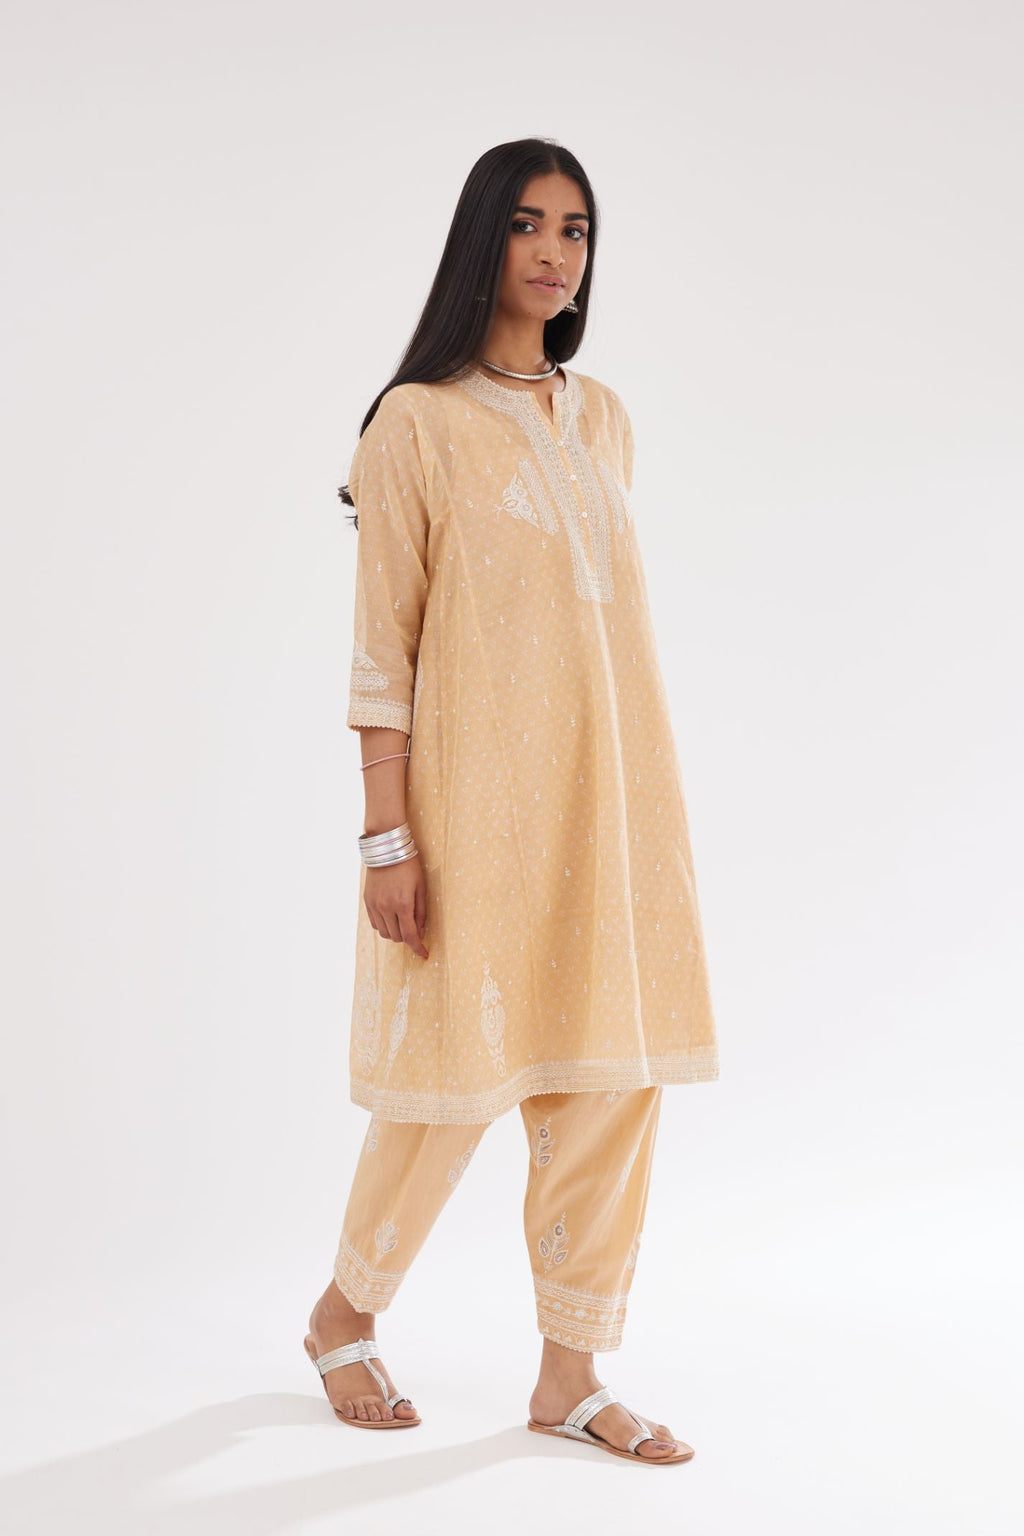 Peach cotton chanderi hand block printed short kalidar phiran style kurta with button placket neckline and dori and silk thraed embroidery all over.